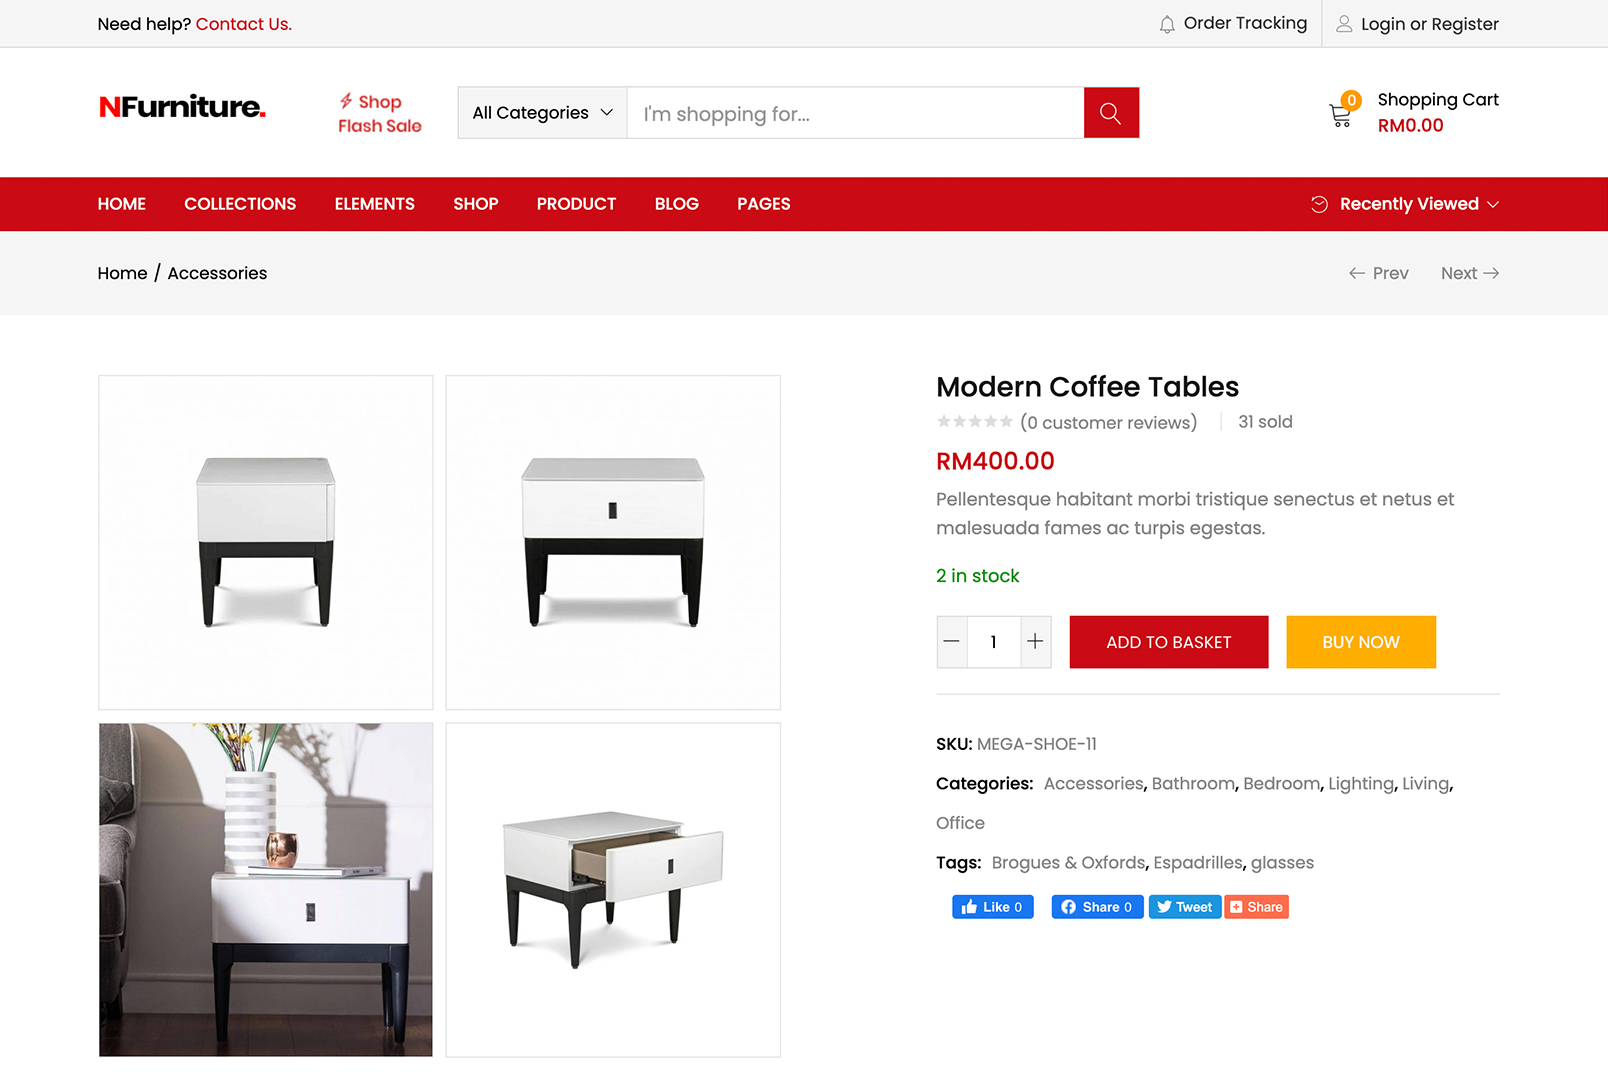 Product Gallery